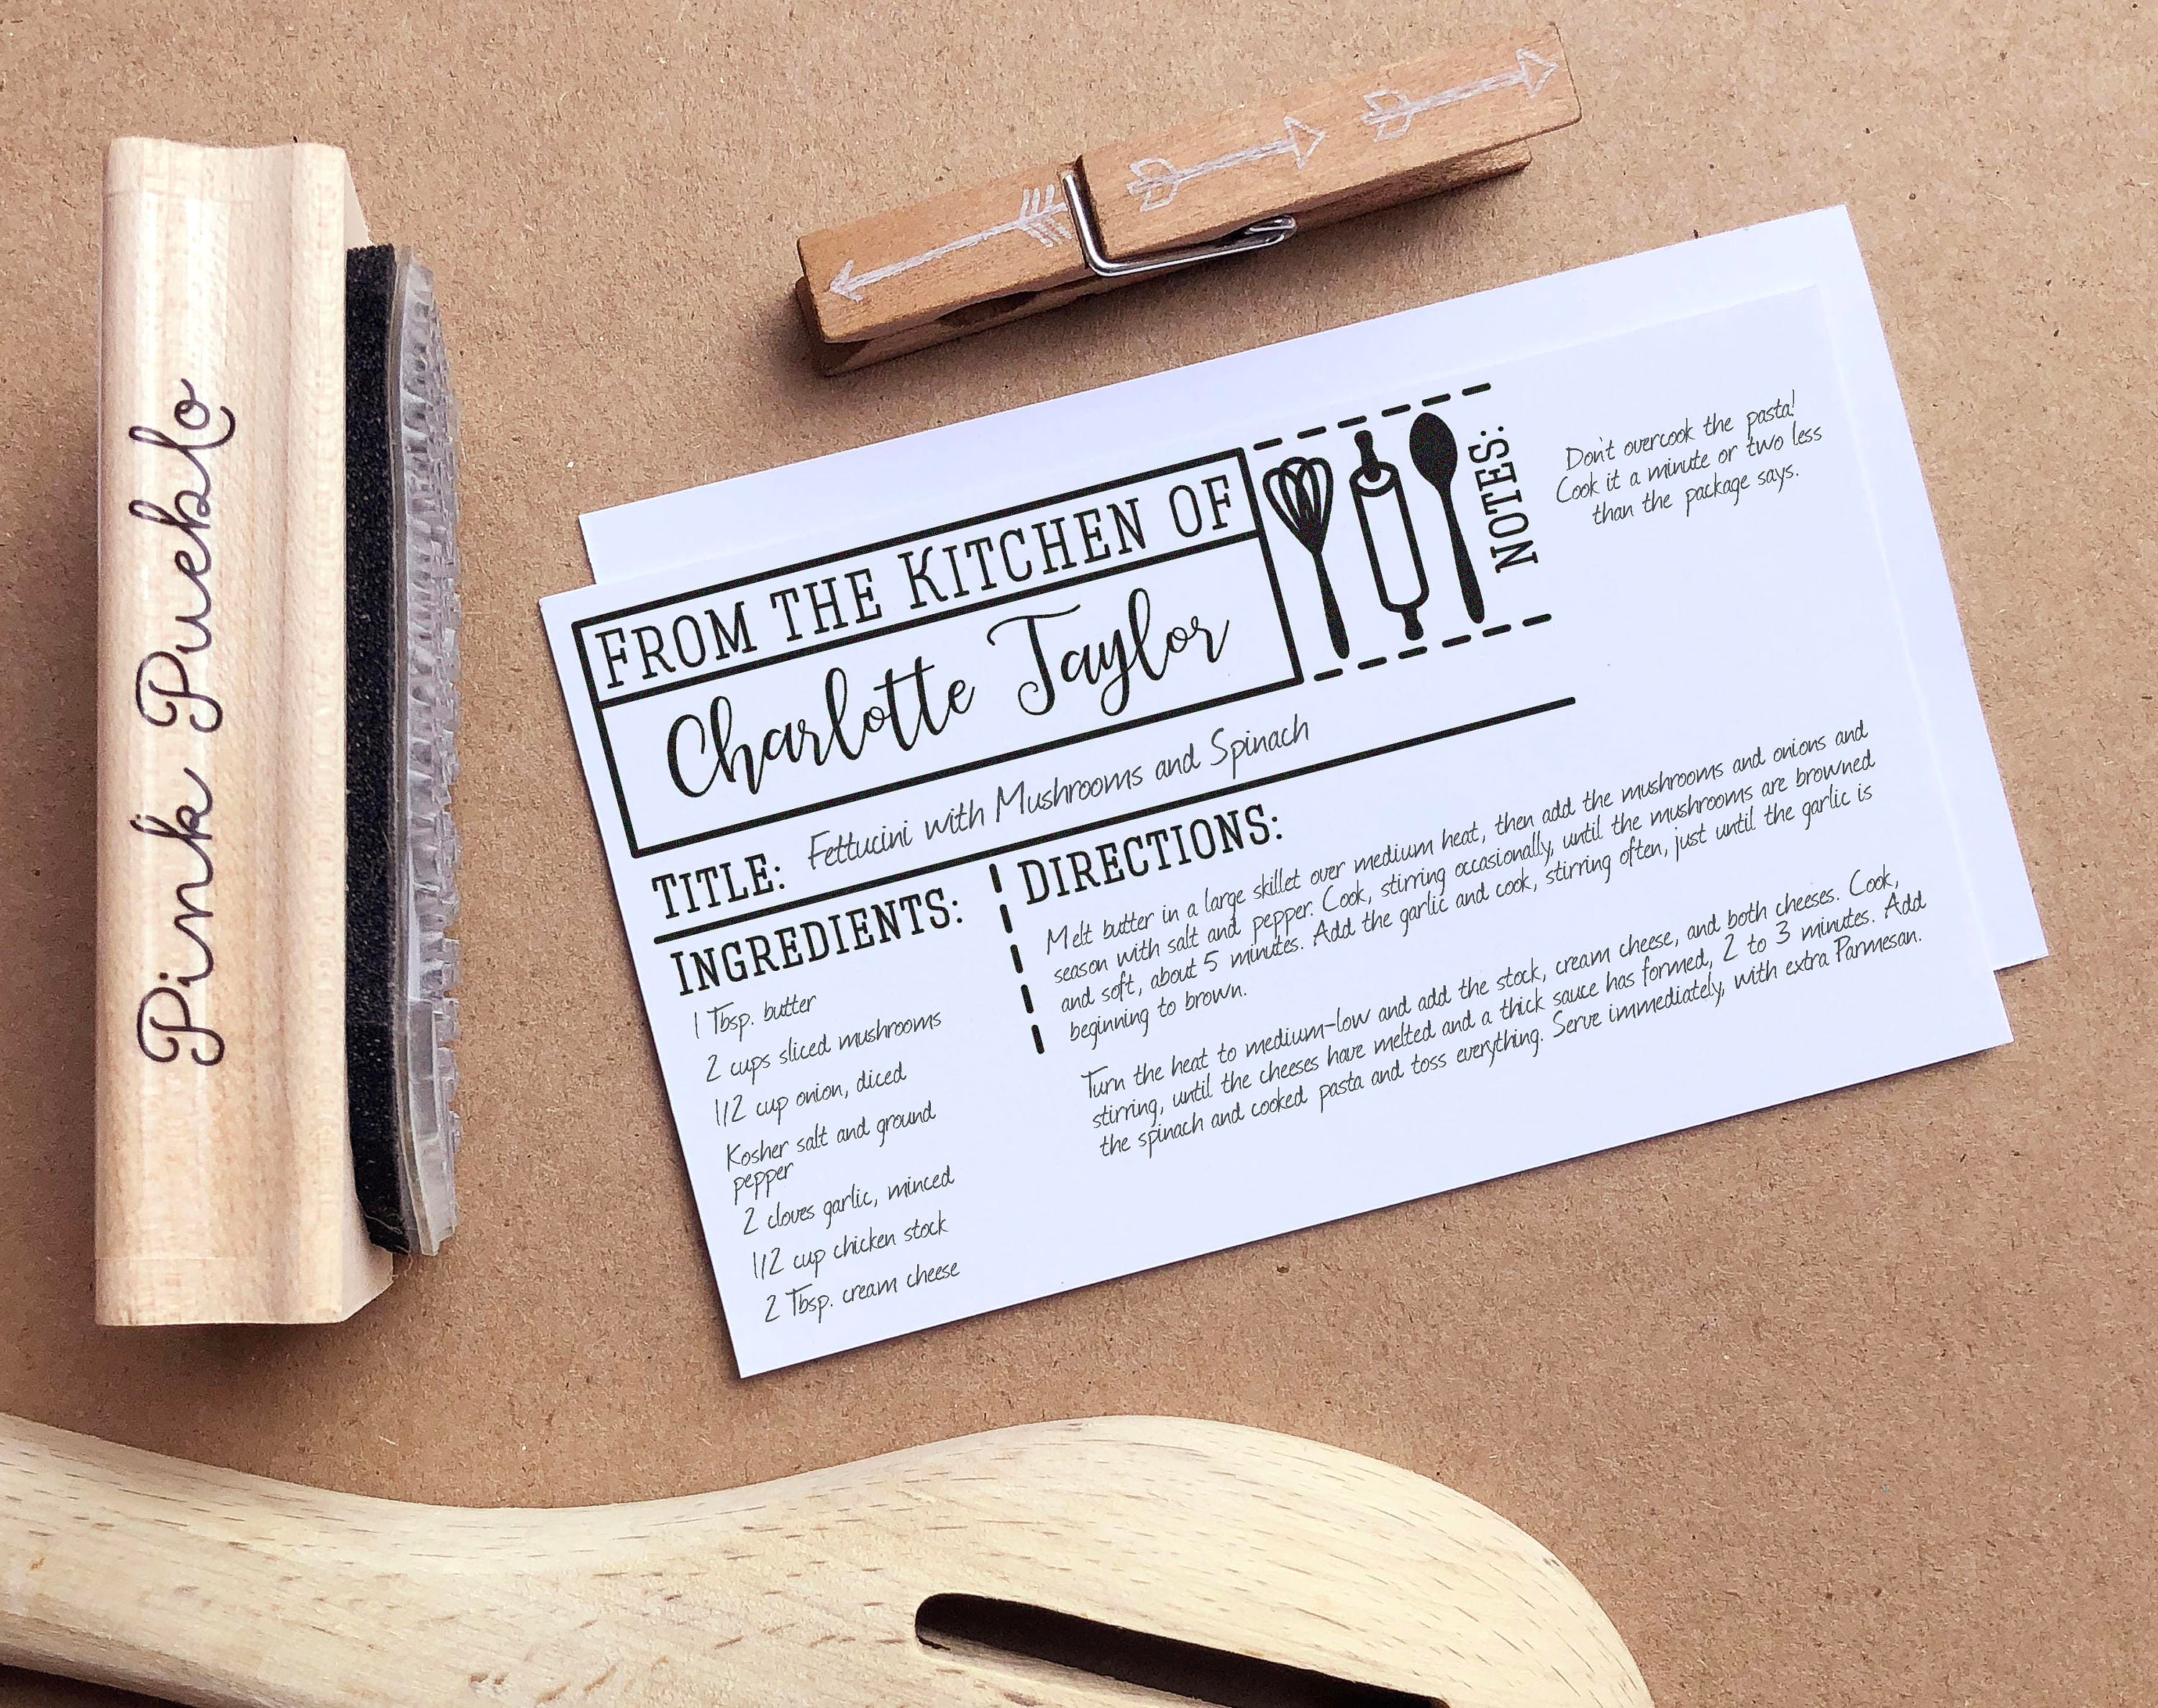 Personalized Recipe Card Stamp, For 3x5, 4x6, 5x7 and 4.25x5.5